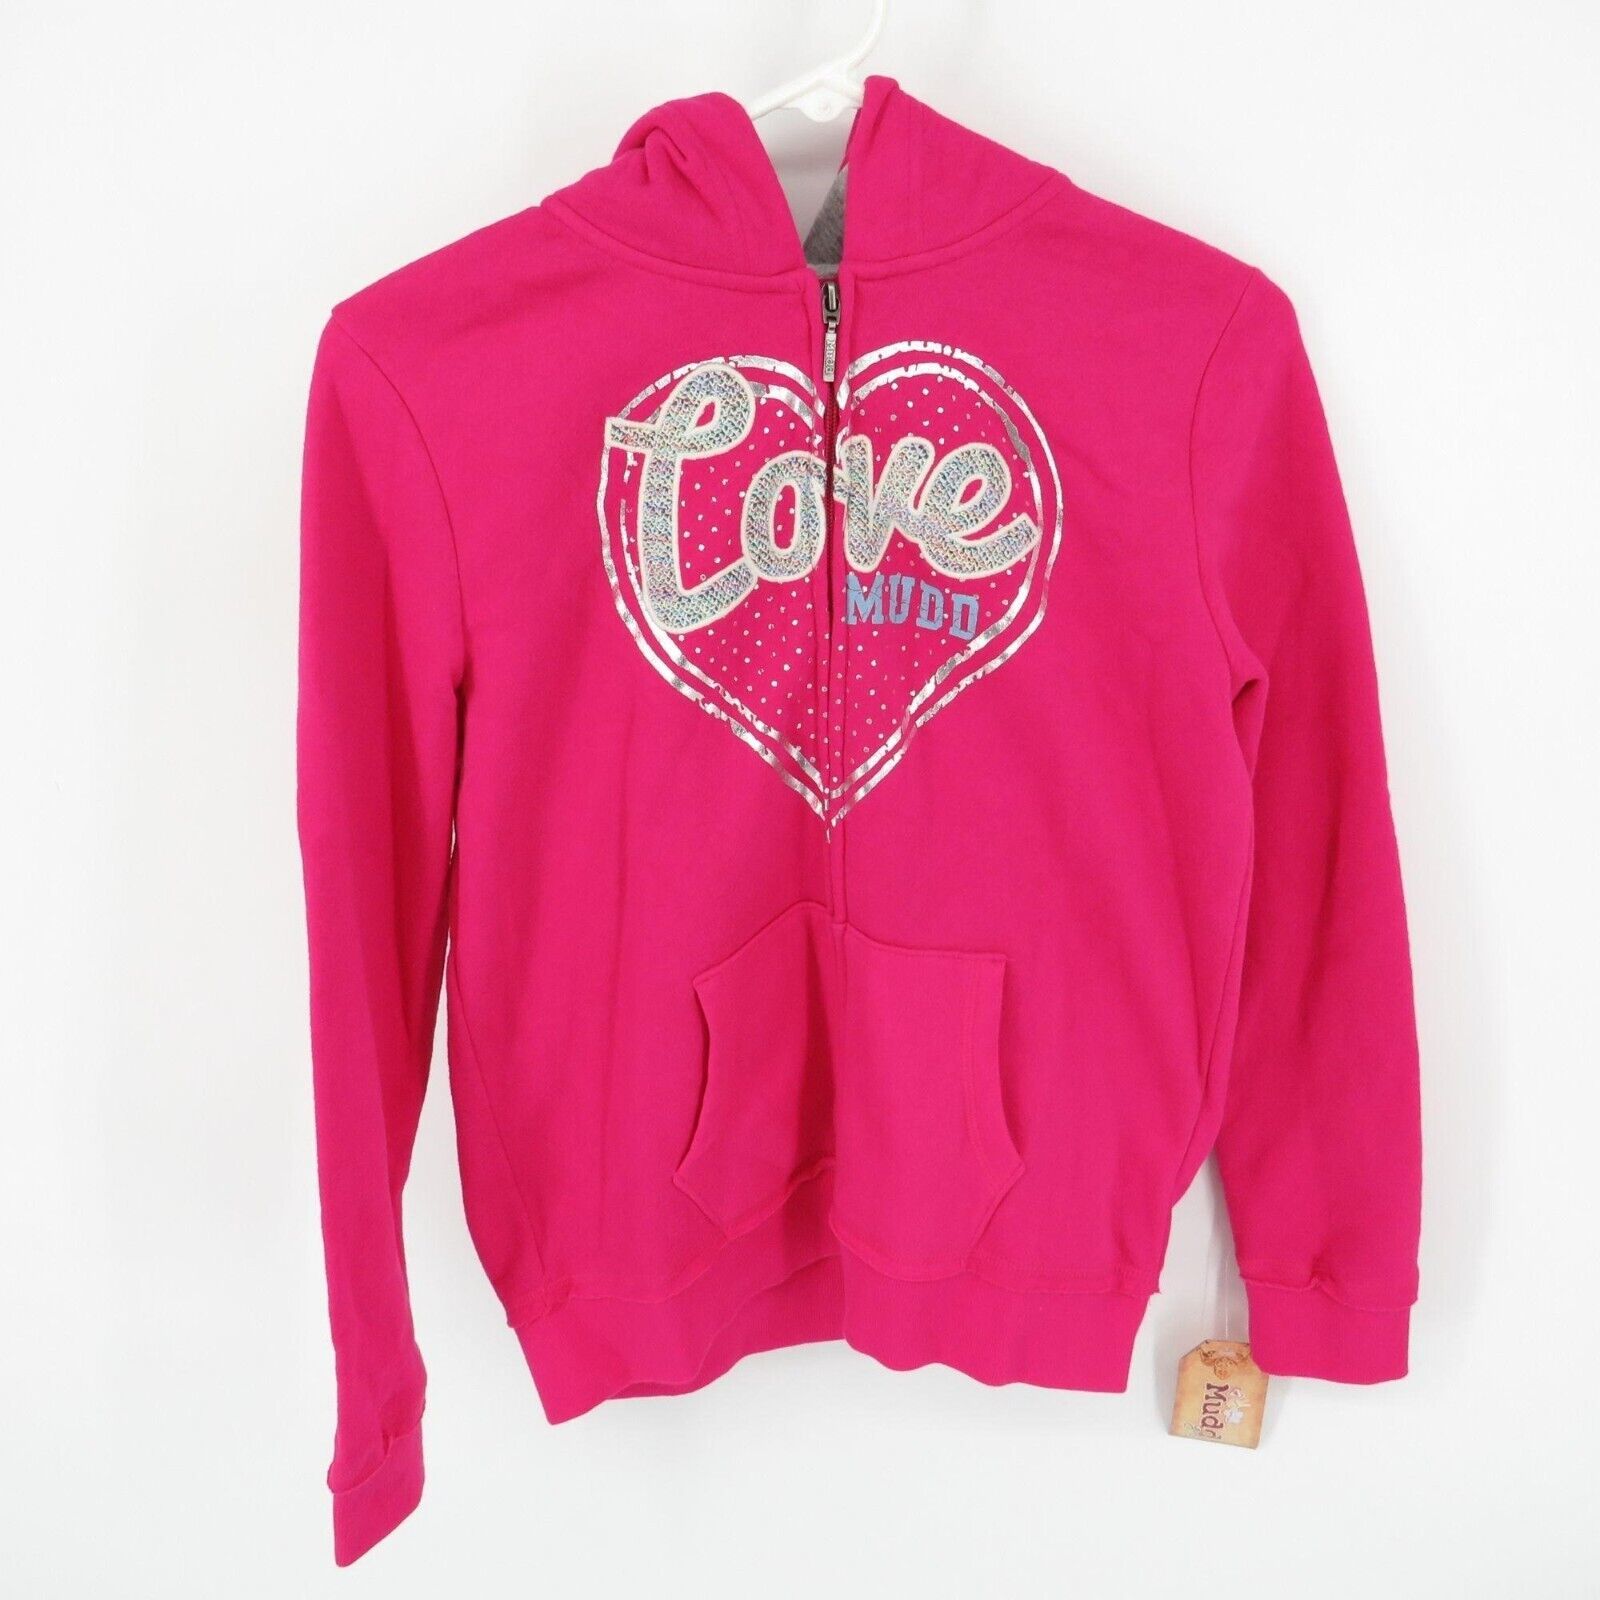 Primary image for Mudd Girls Pink Zip Up Hoodie Size 14 1/2  NWT $40